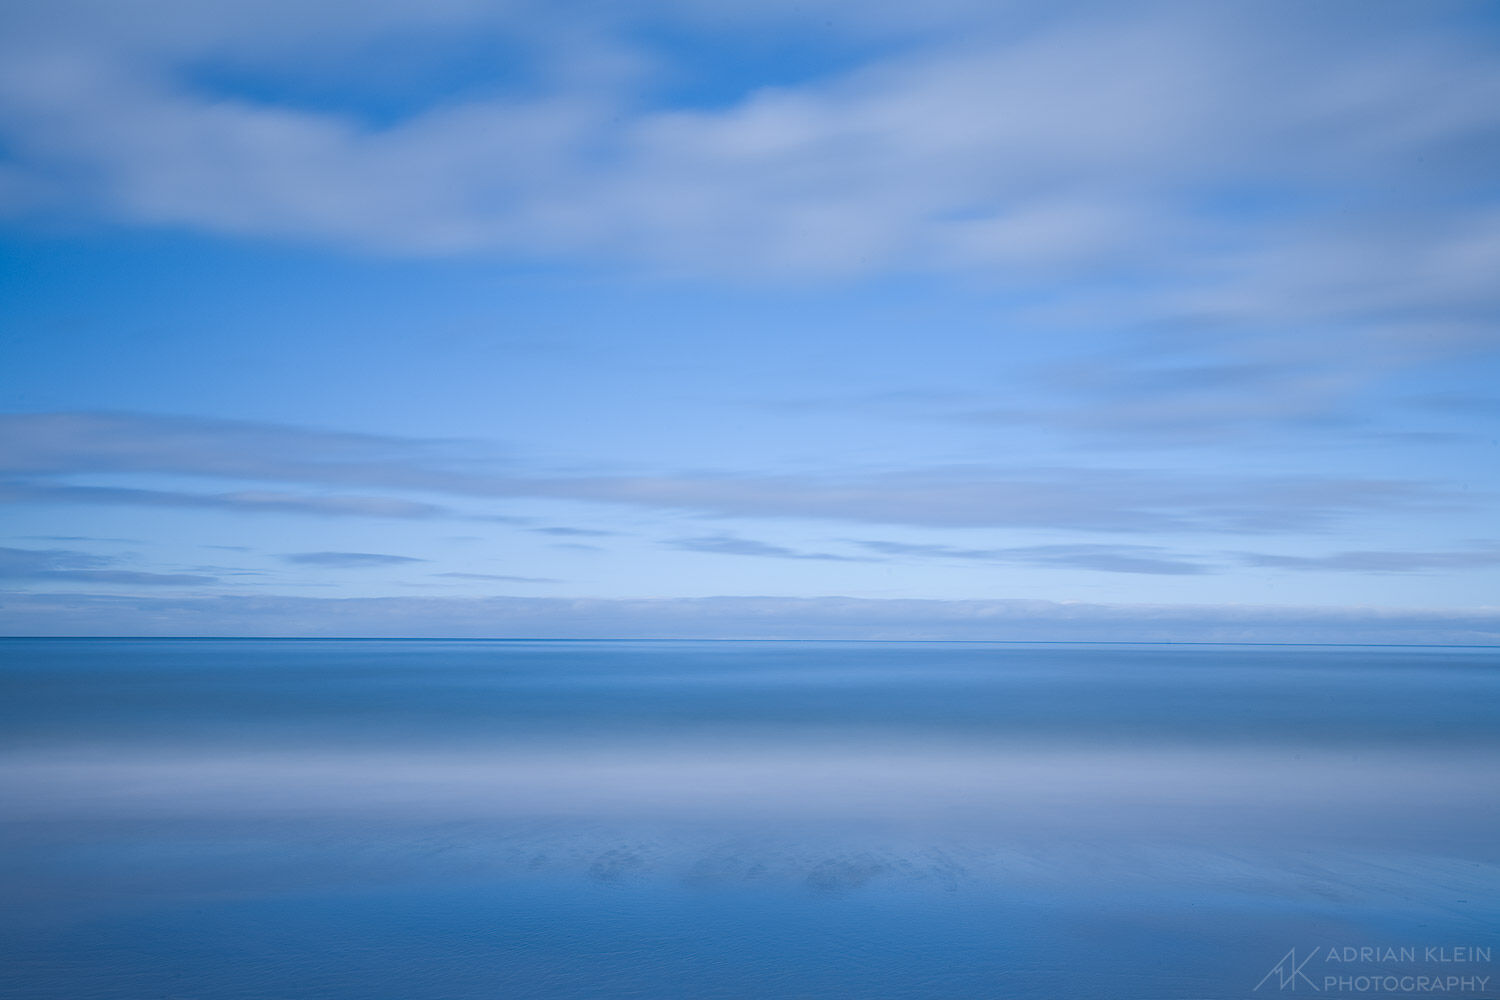 Long exposure midday on the Oregon Coast showing the simple beauty of nature.